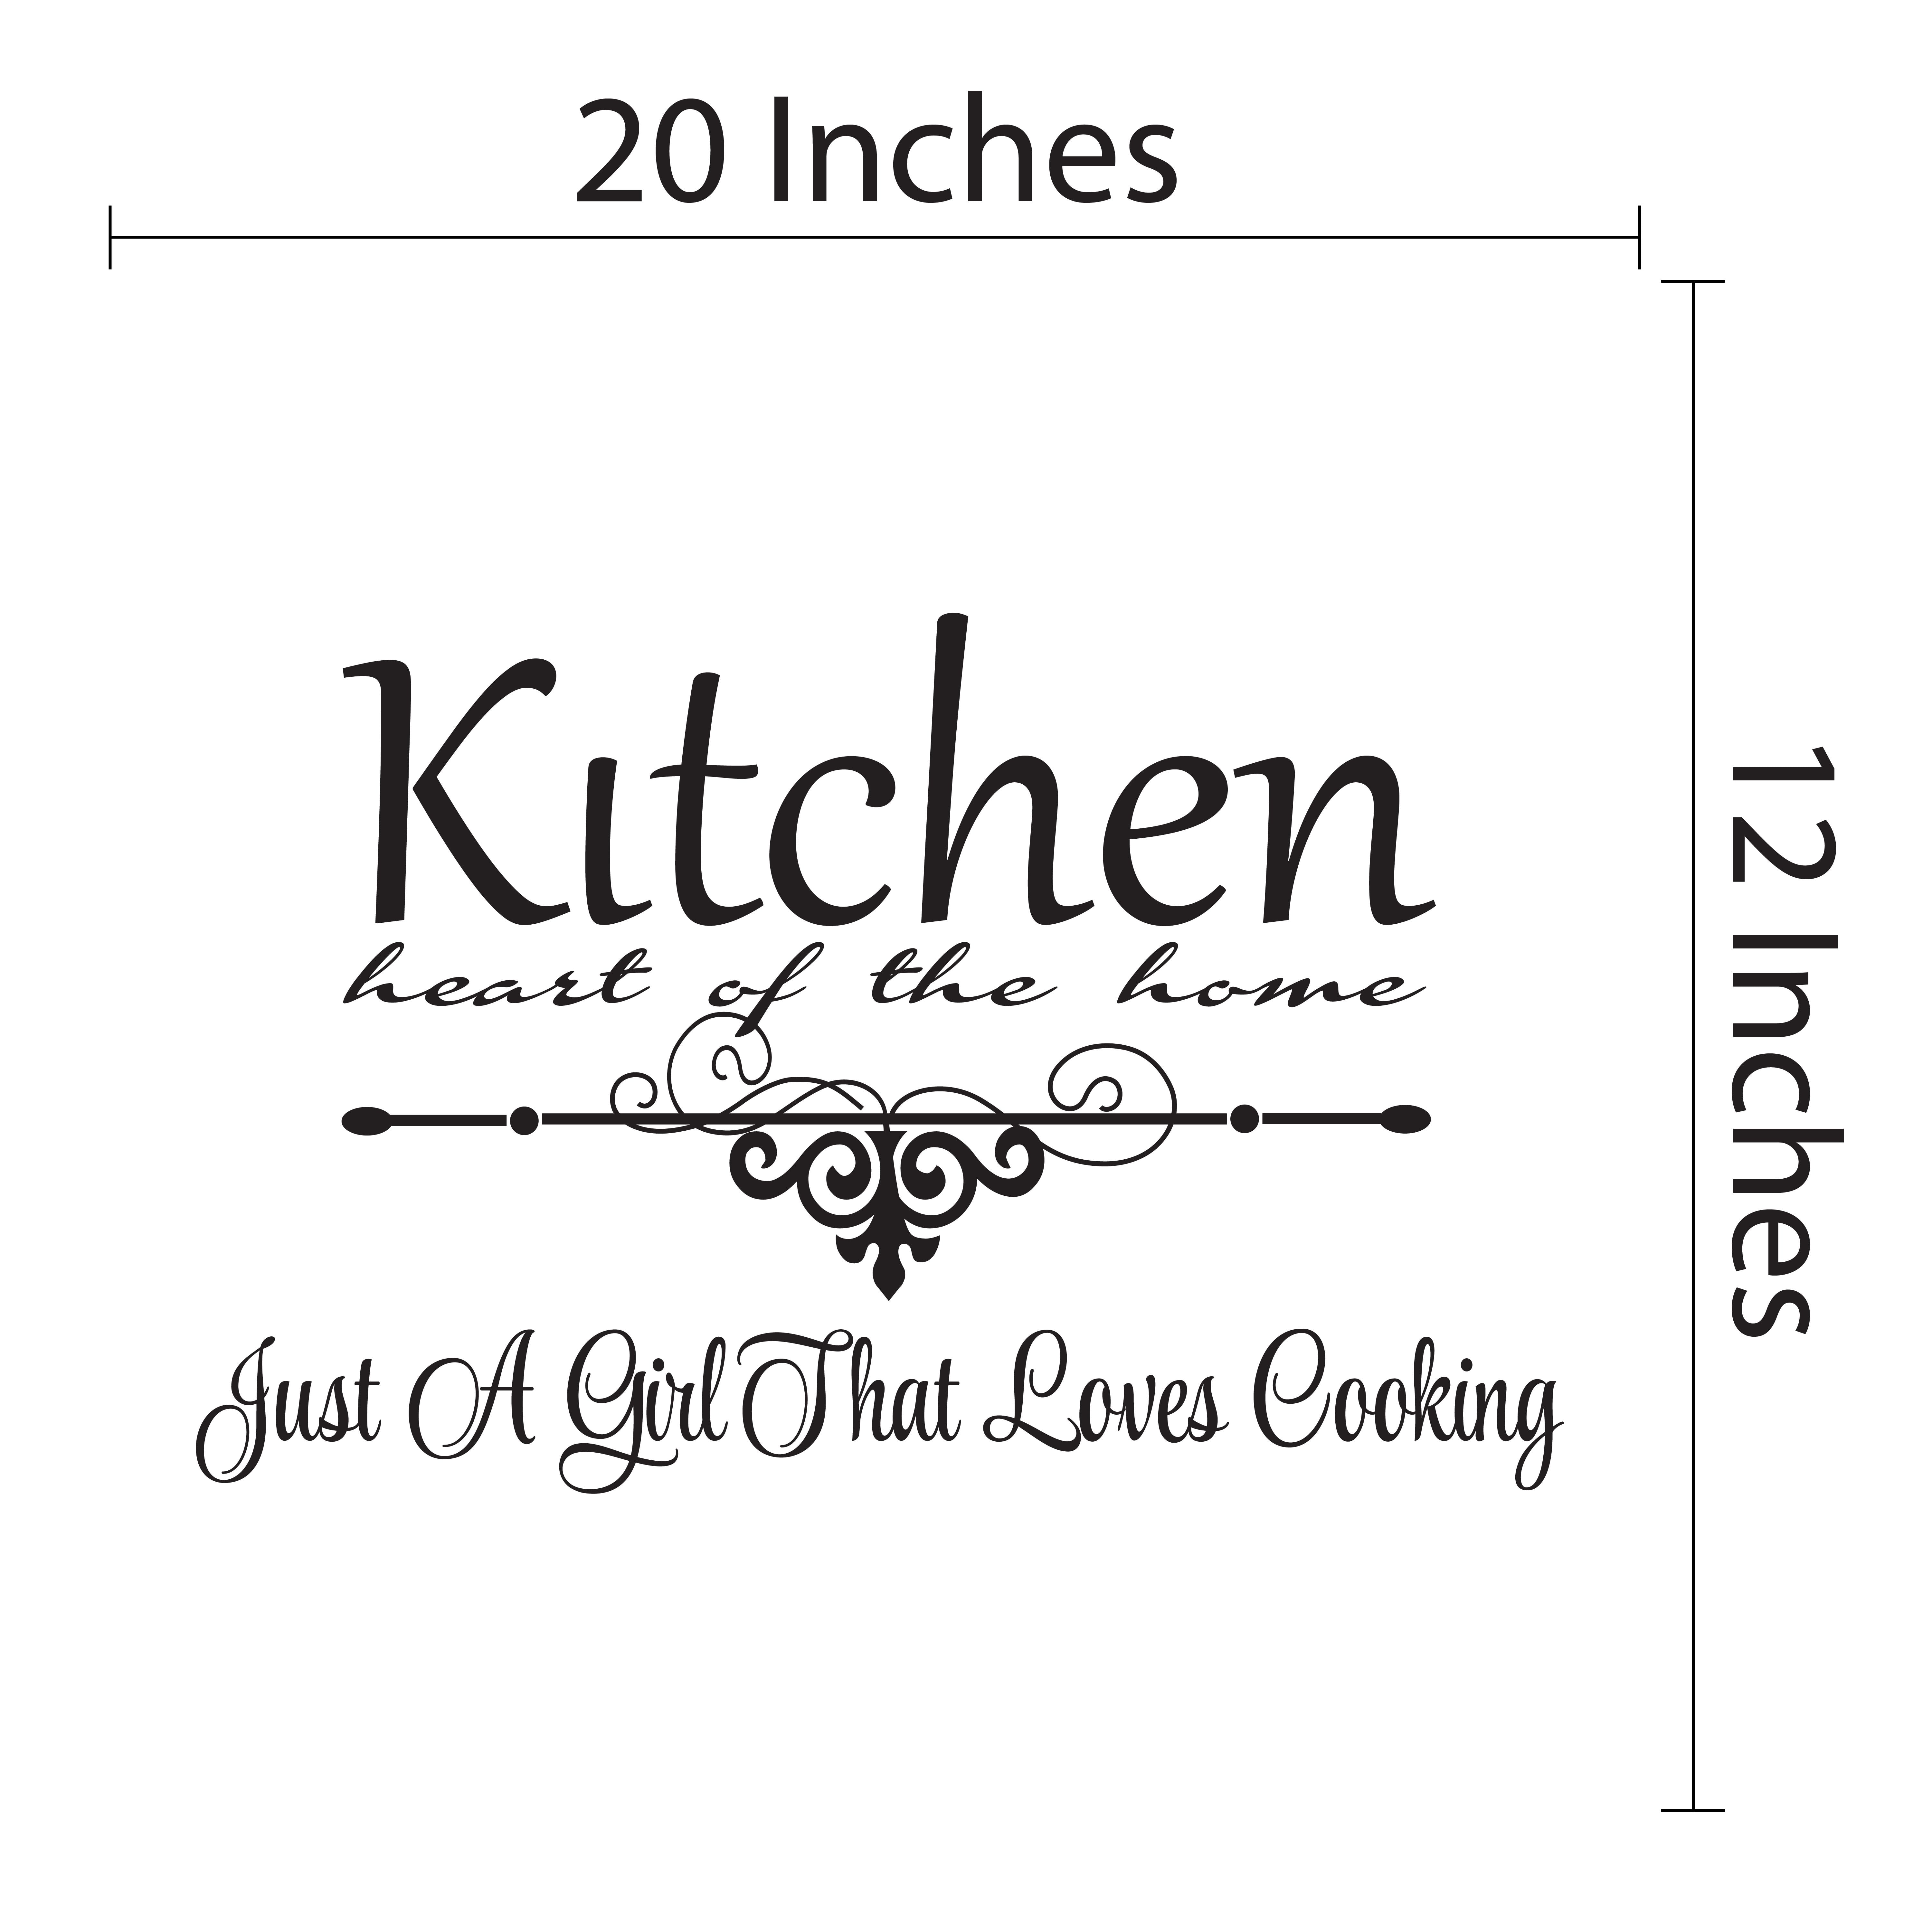 33 Sincere Kitchen Quotes From the Plate to the Heart